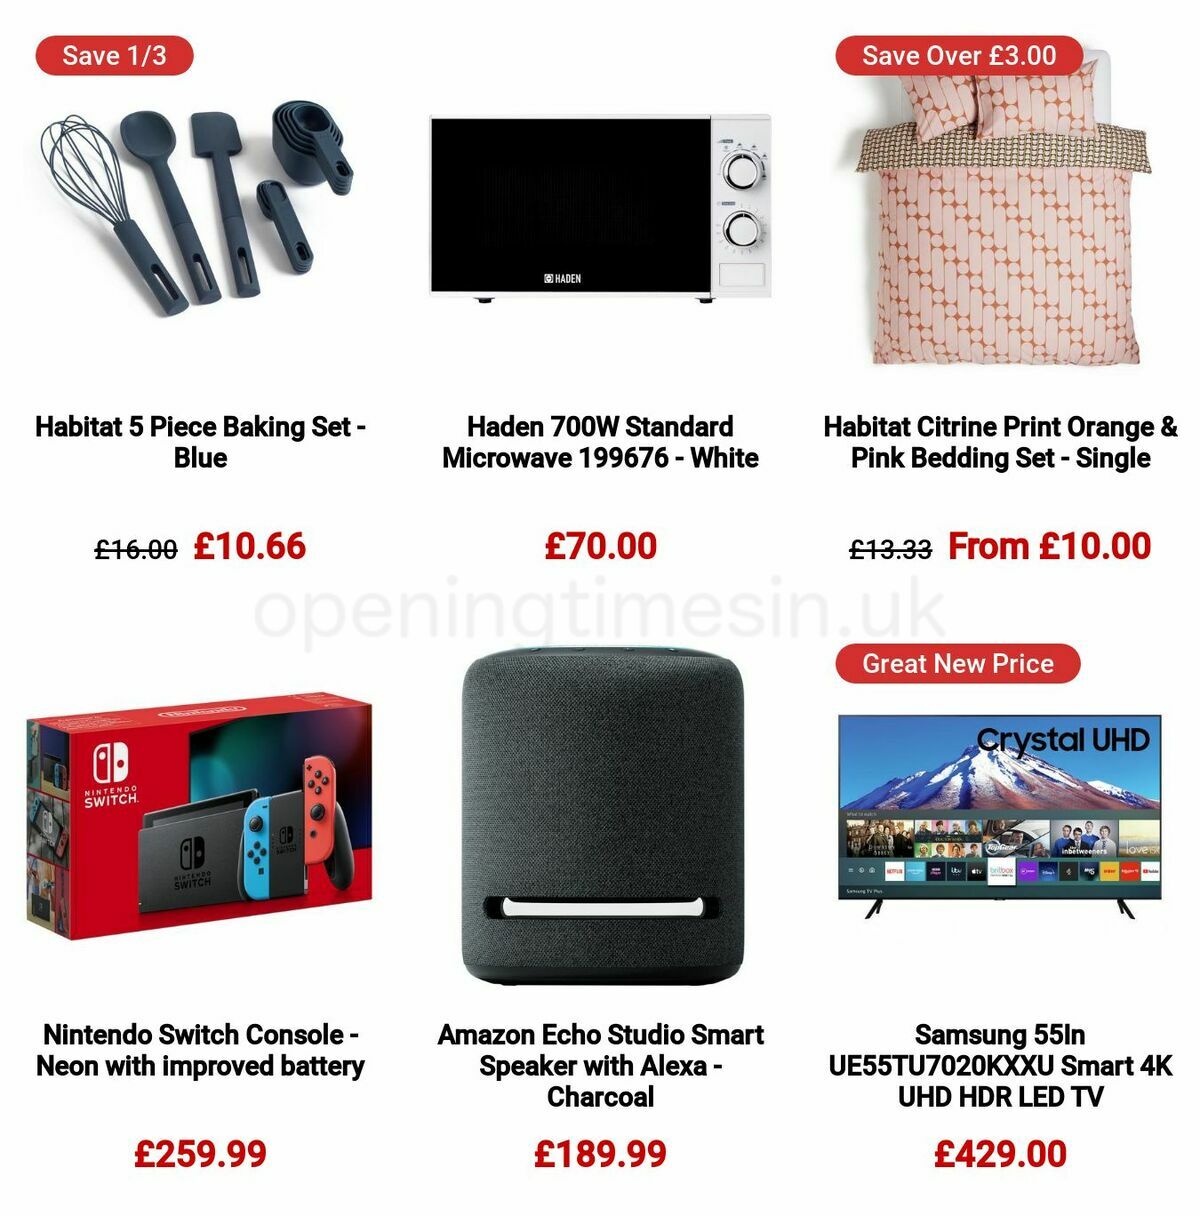 Argos Offers from 29 August